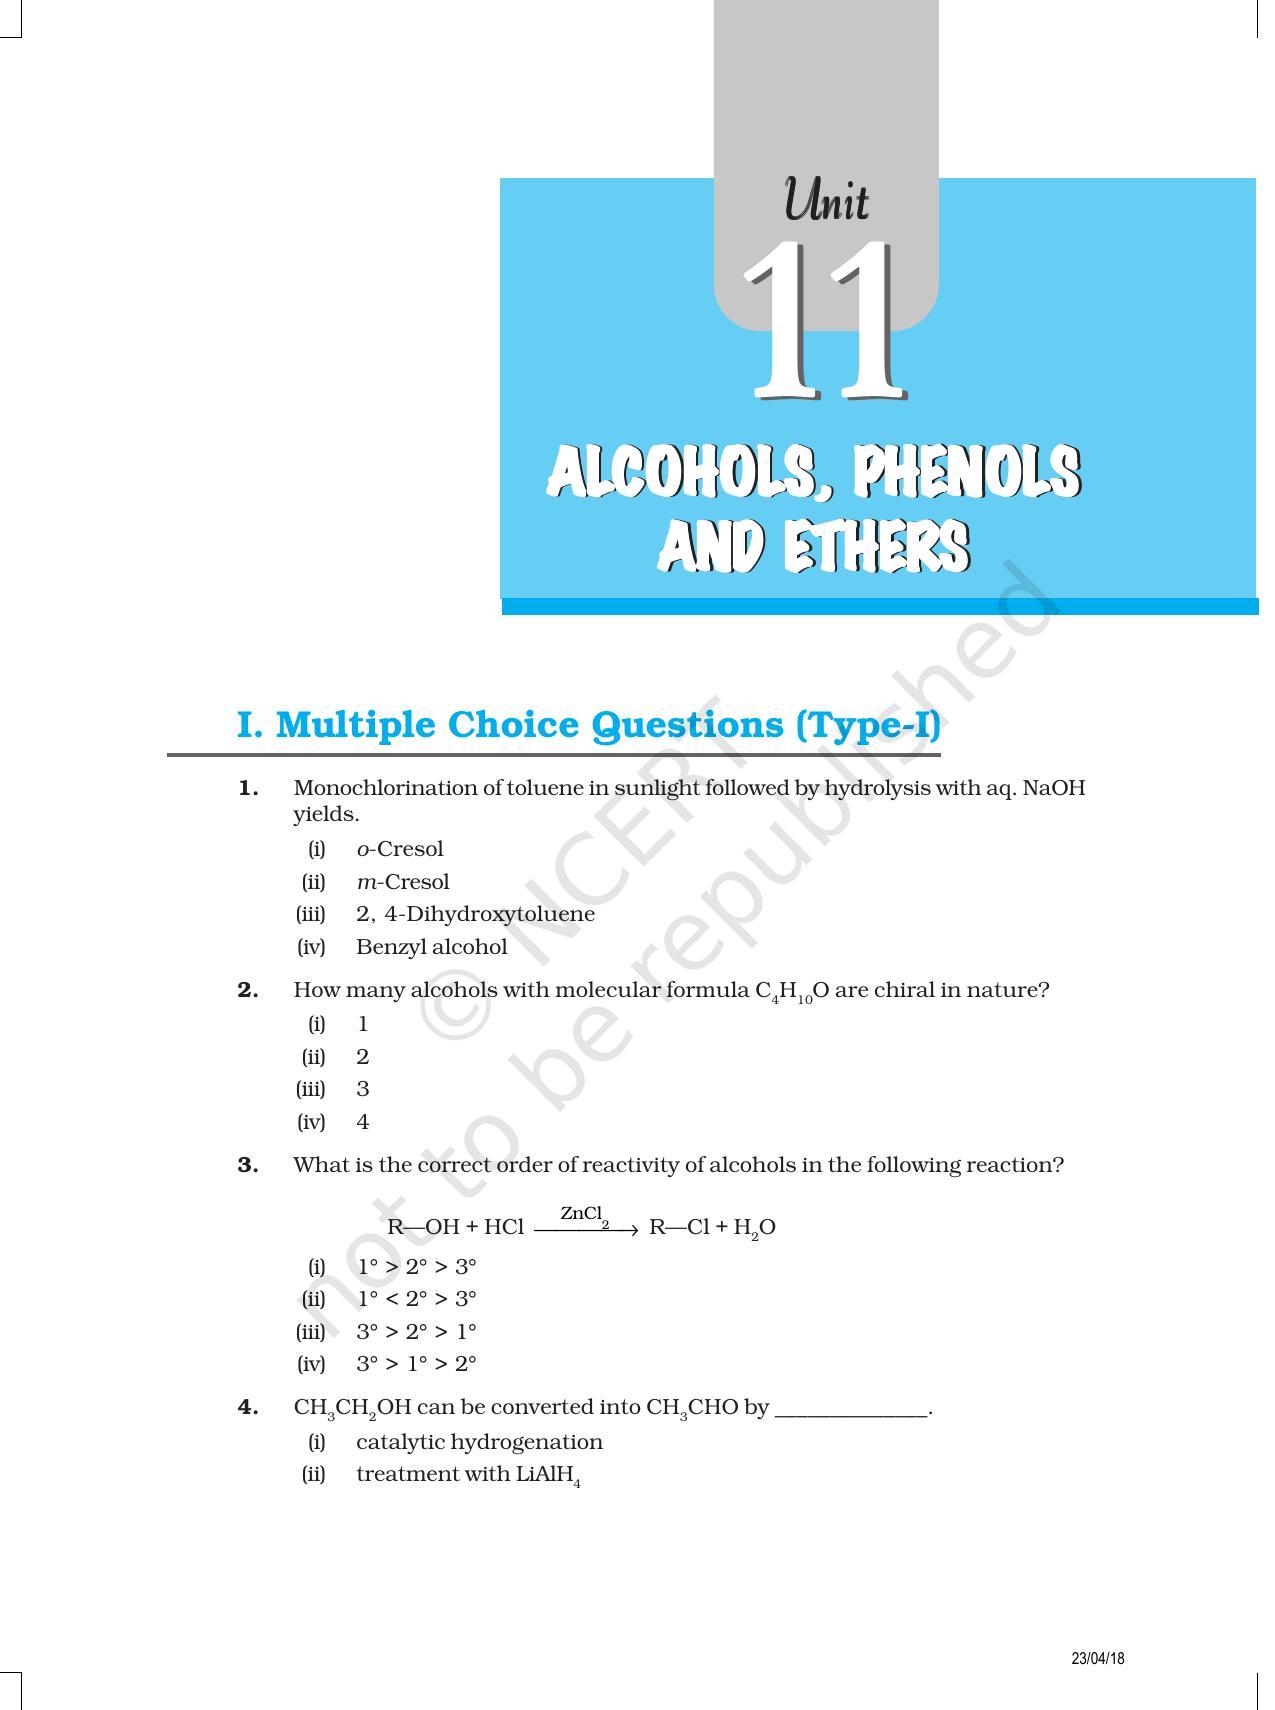 NCERT Exemplar Book for Class 12 Chemistry: Chapter 11 Alcohols, Phenols and Ethers - Page 1